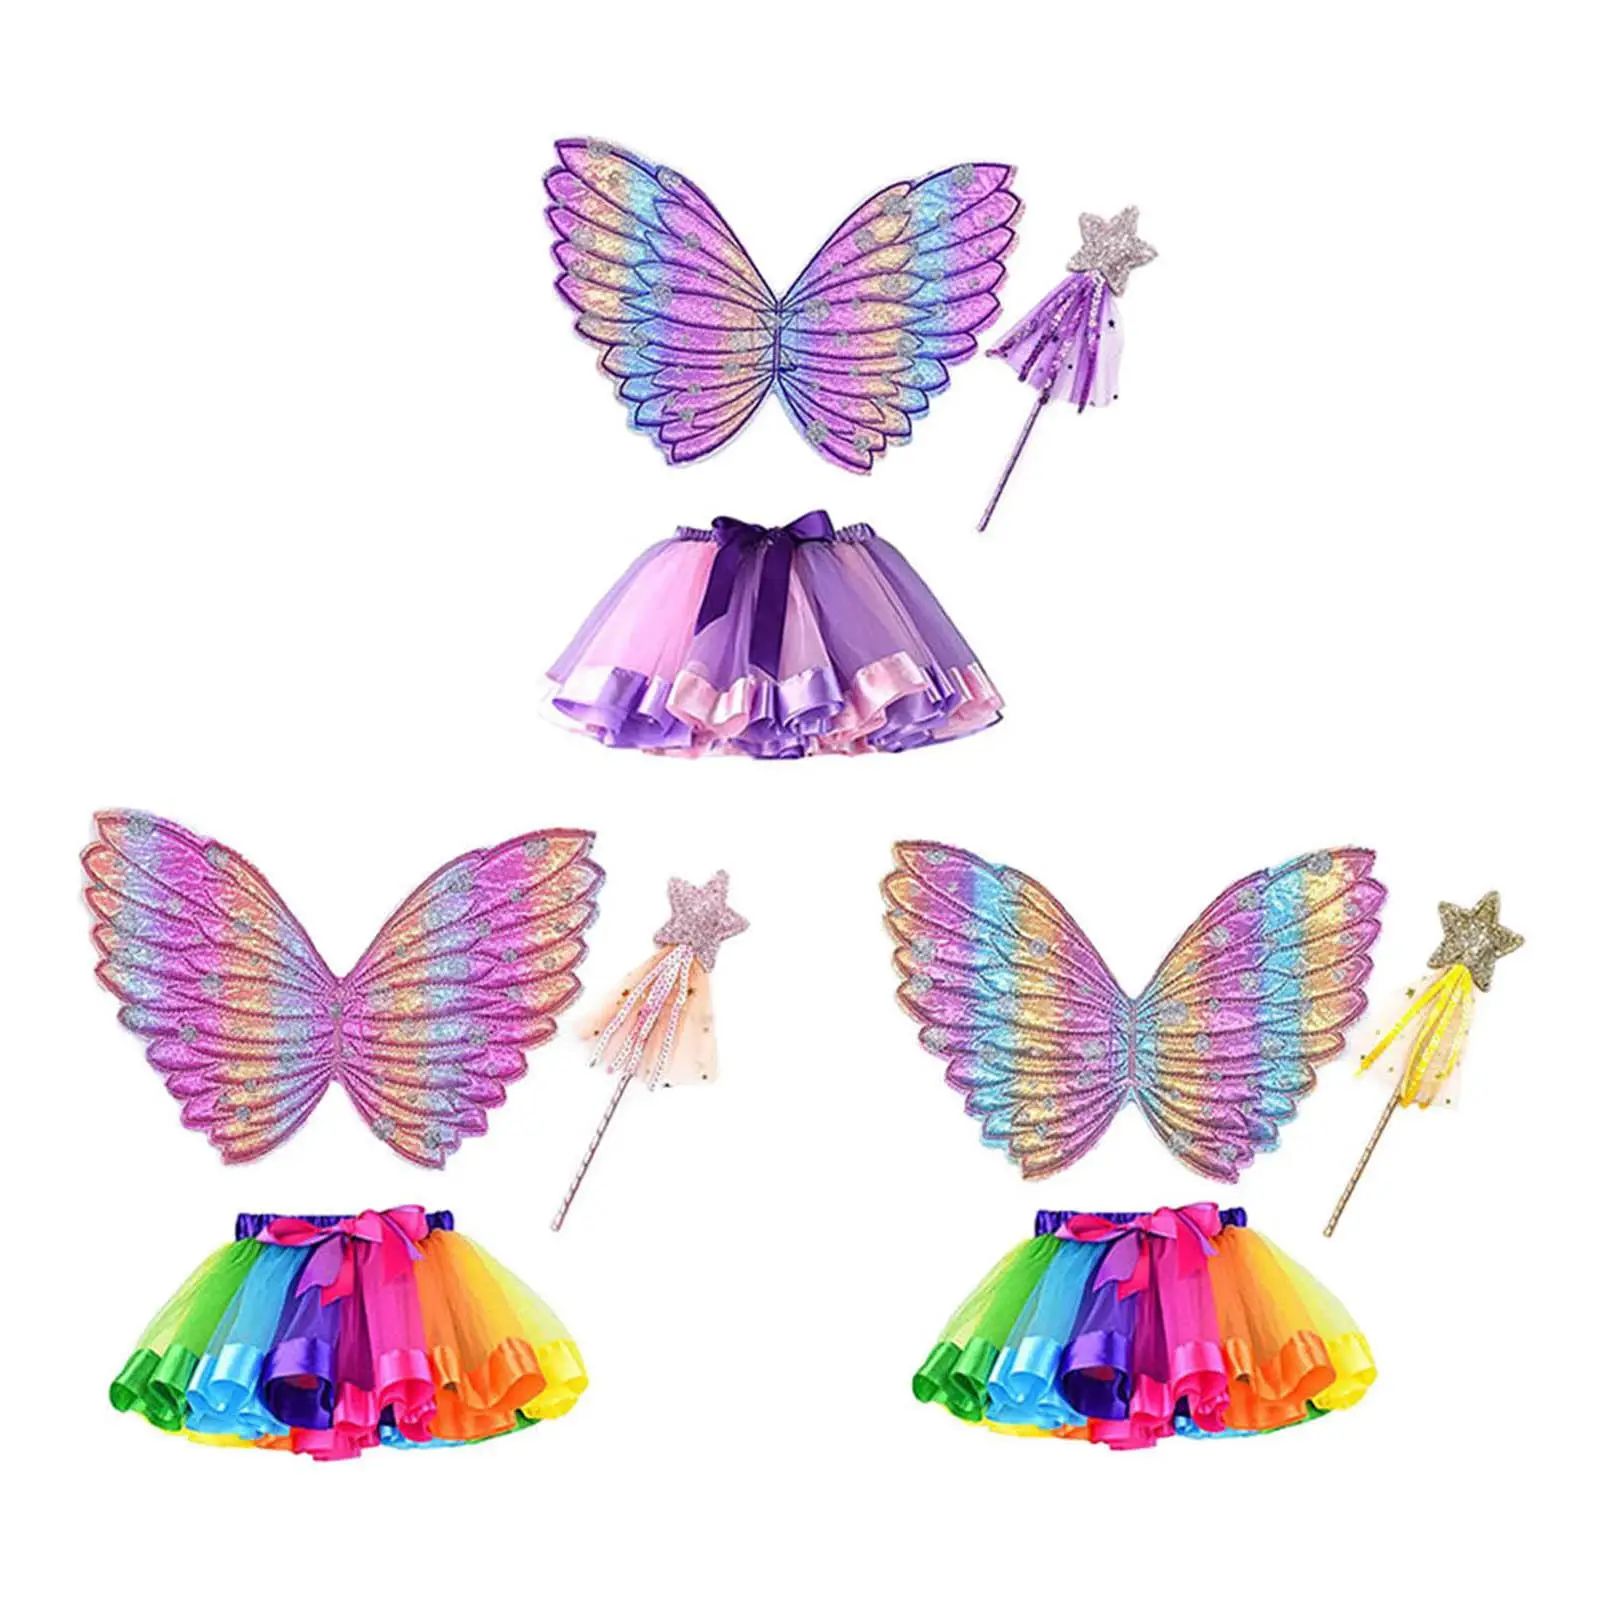 Girls Butterfly Wing Costume Fancy Dress up Fairy Children Wand Outfit for Photo Props Christmas Pretend Play Stage Performance